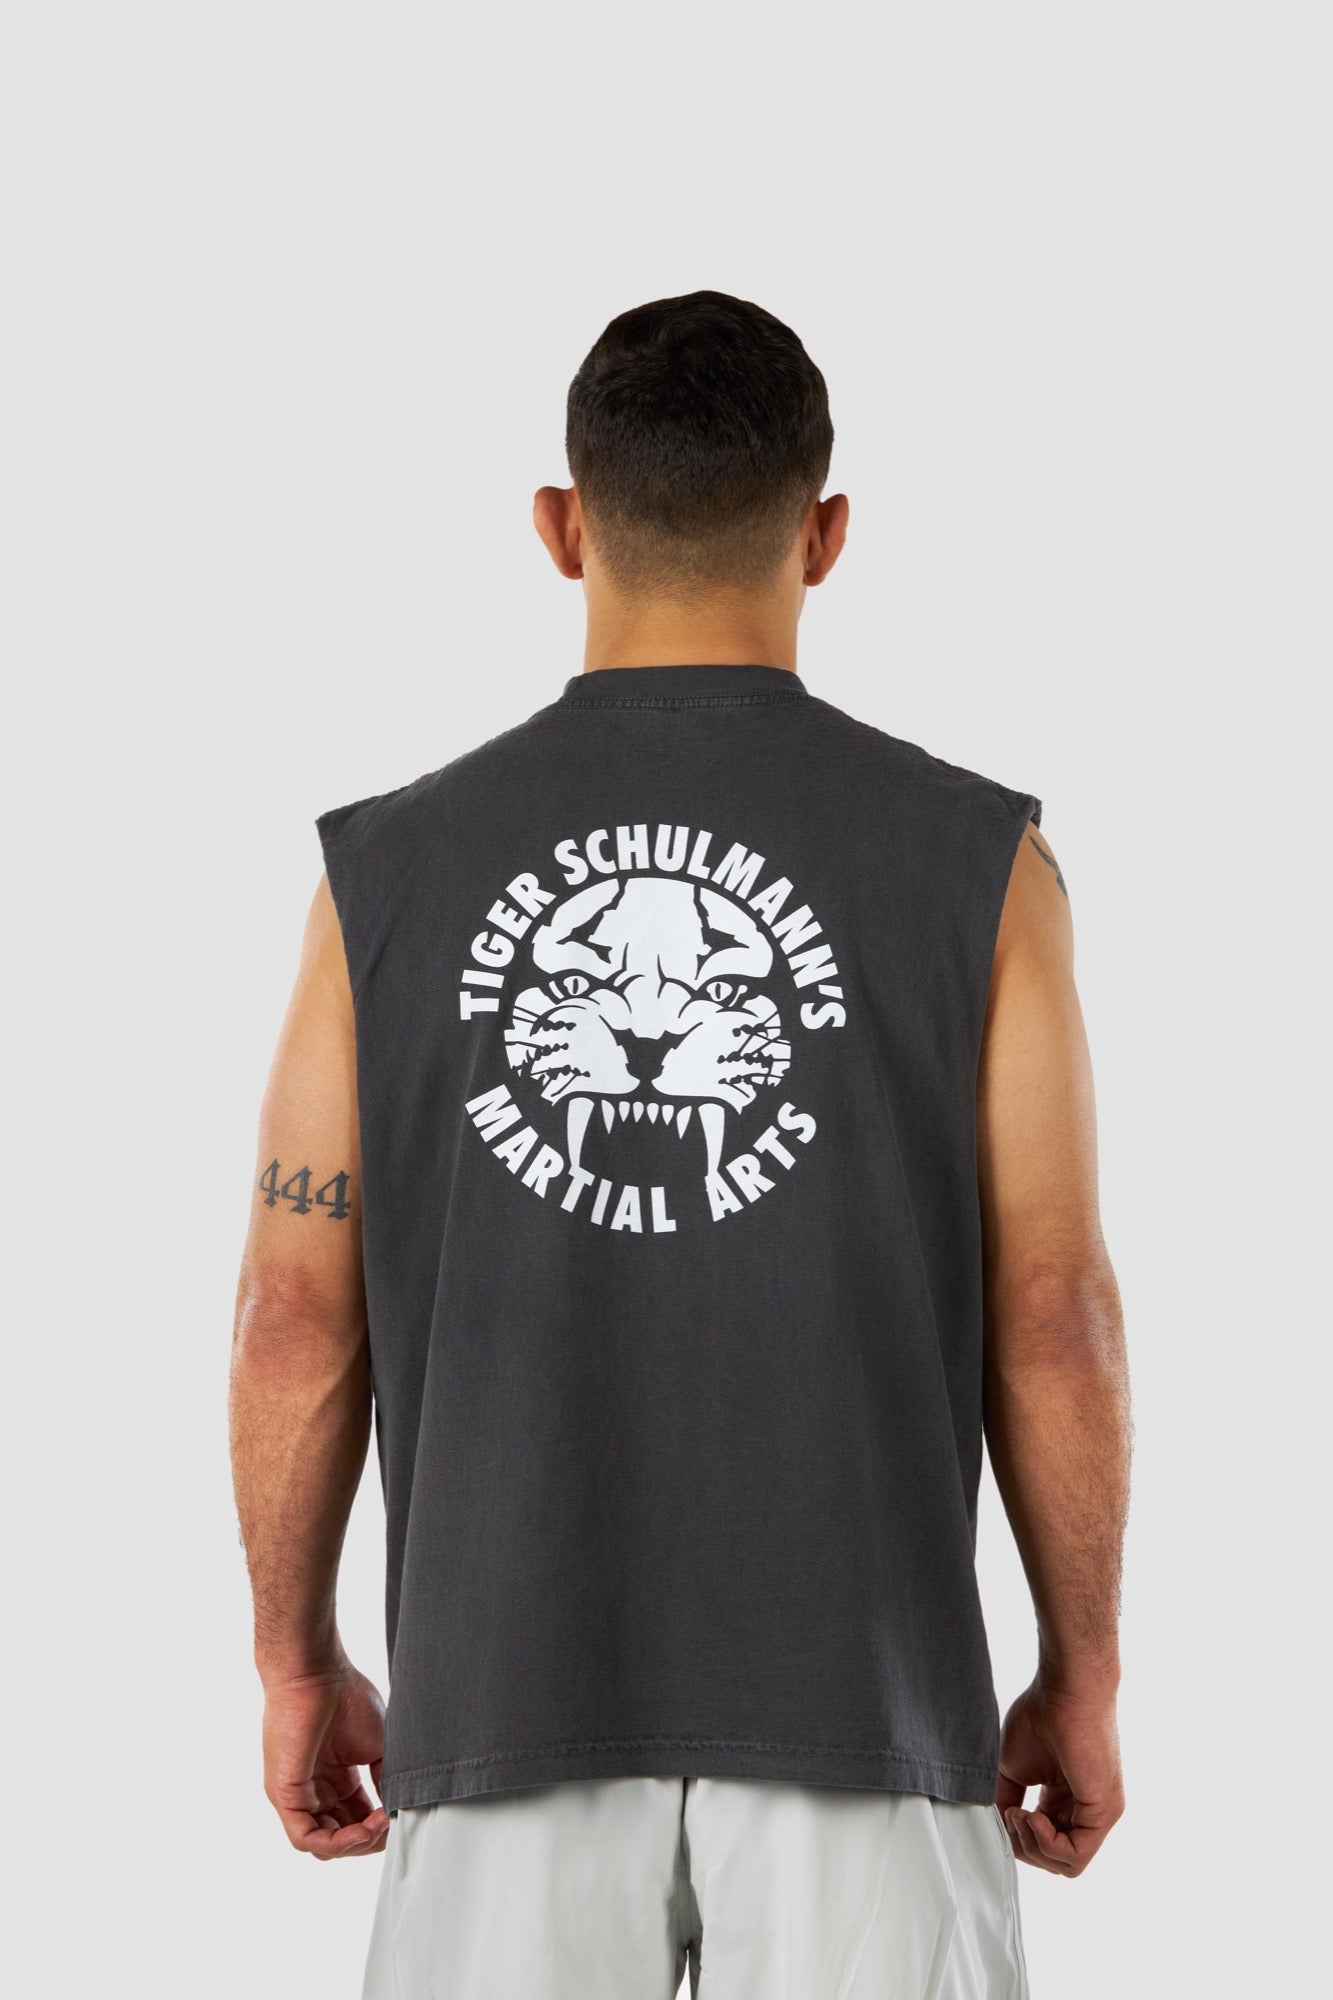 'Tiger Trained' Muscle Tank